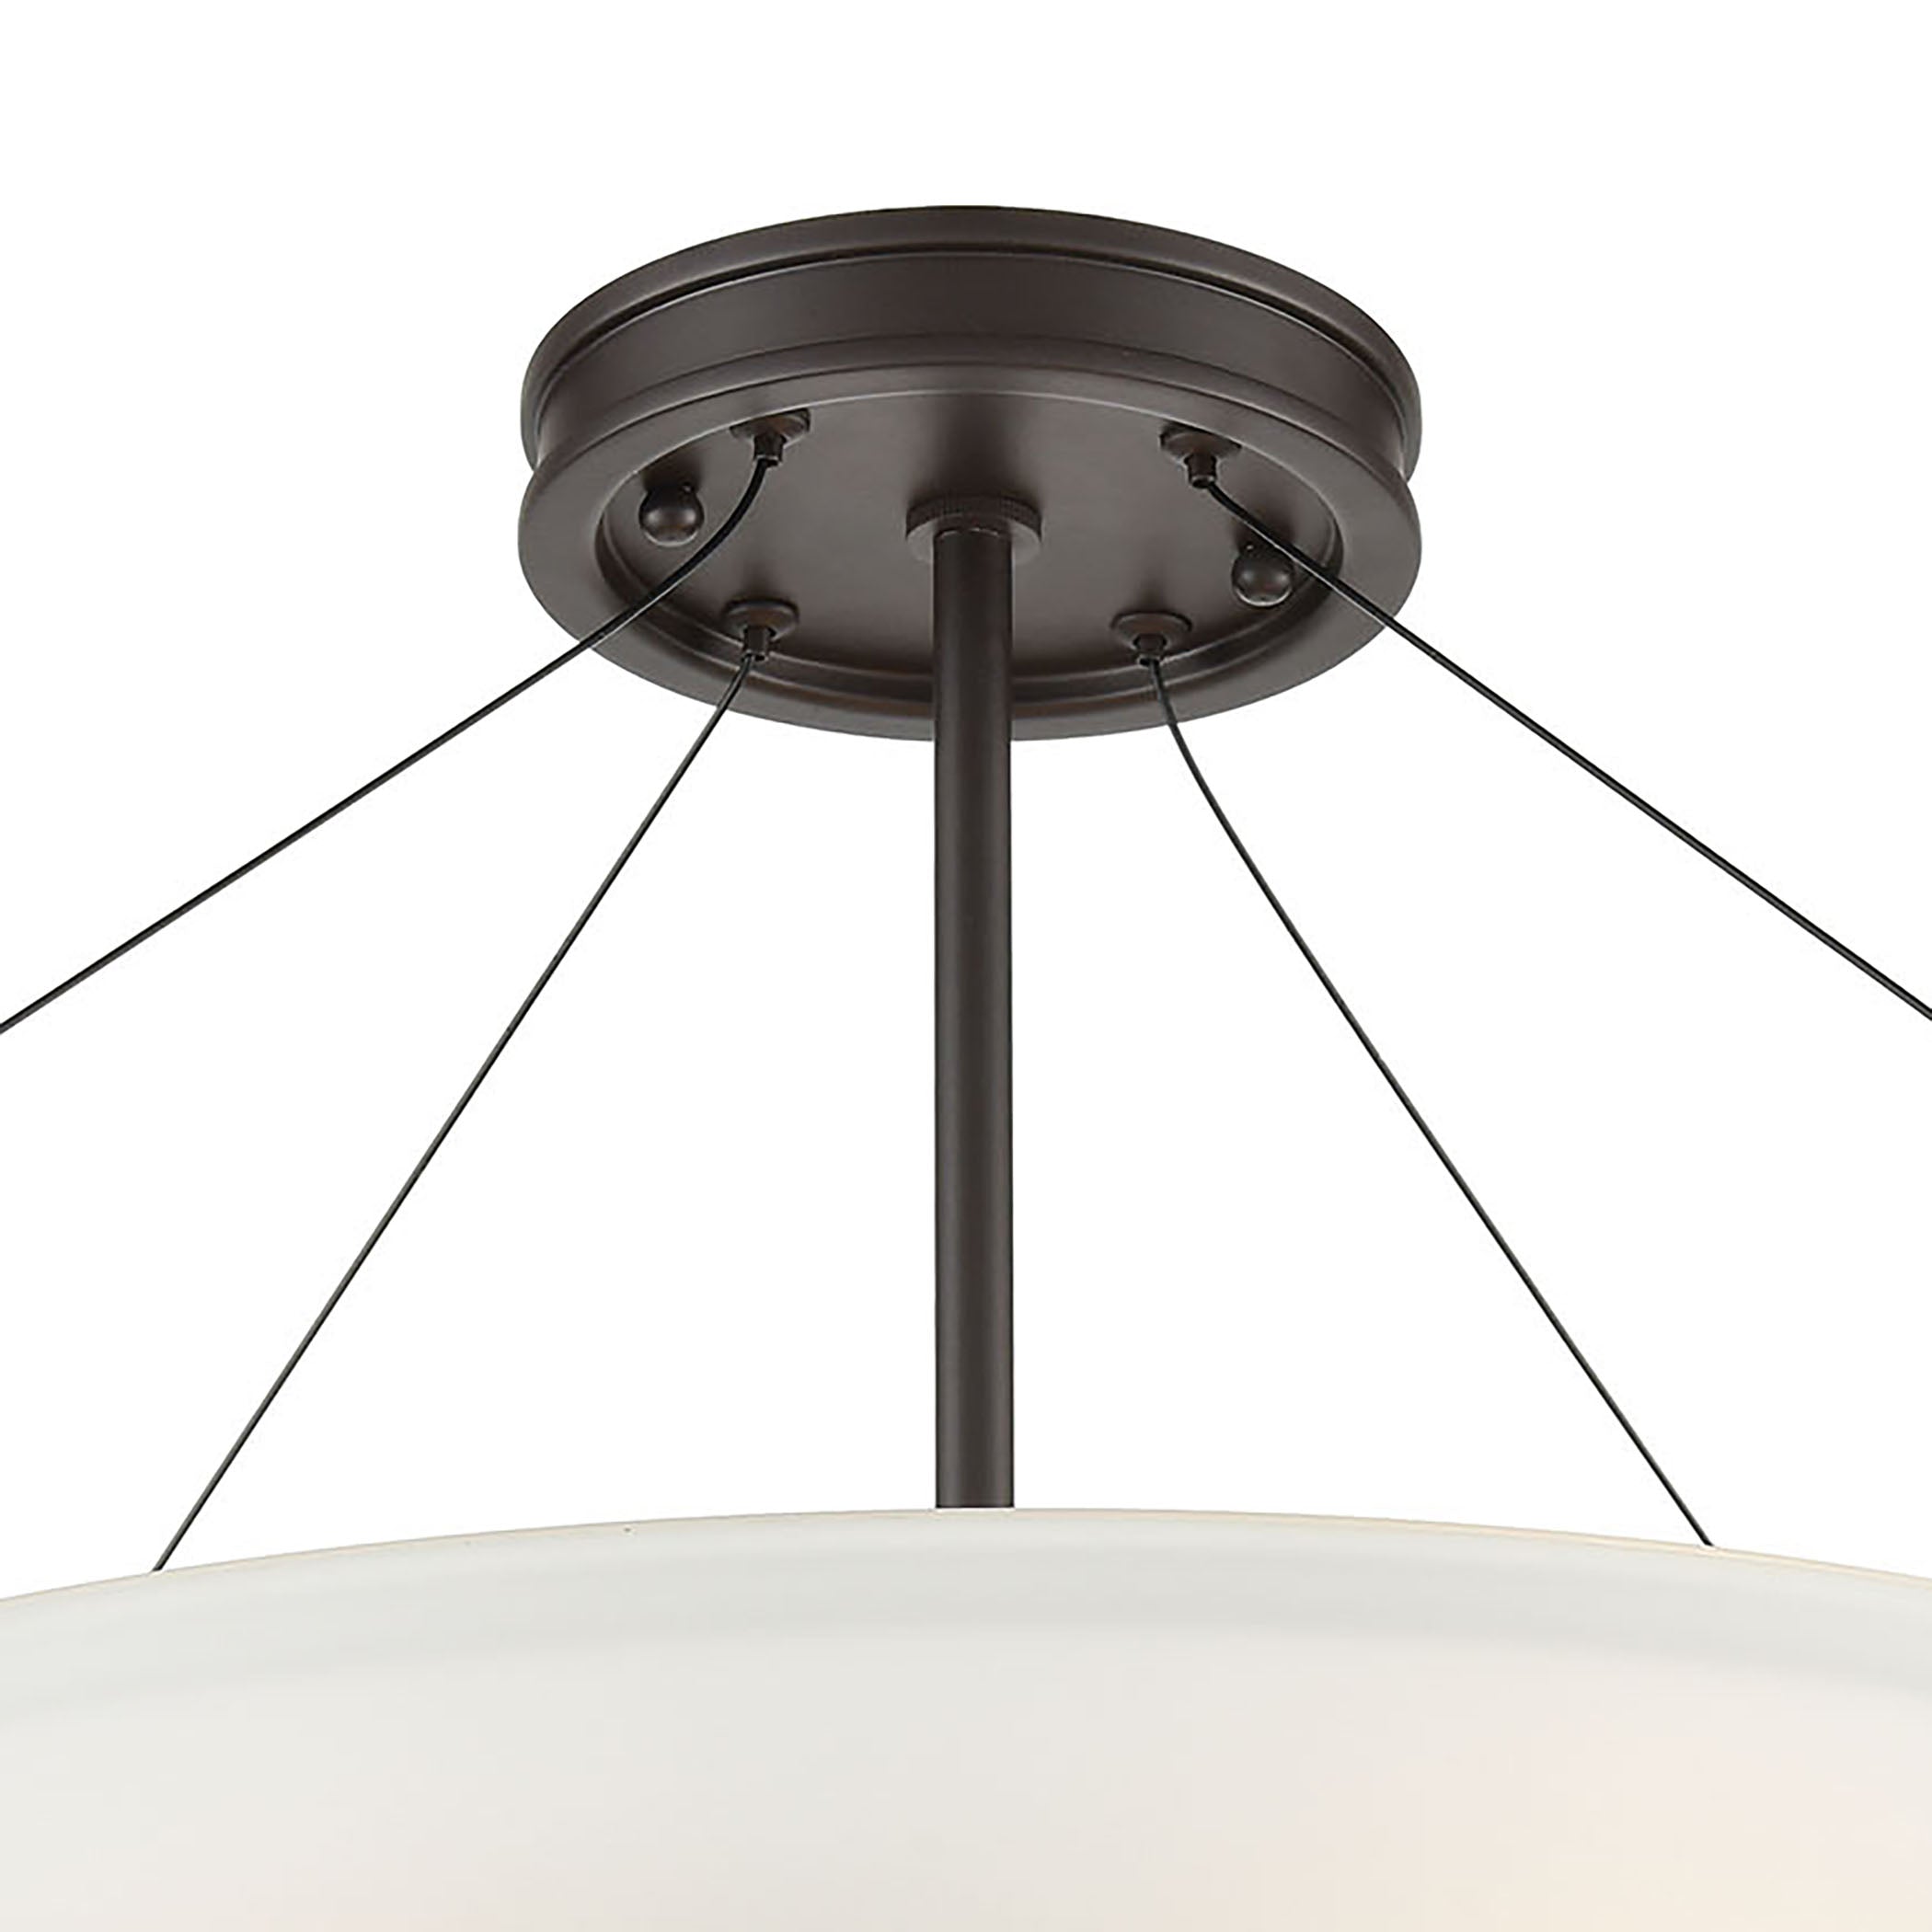 ELK Lighting 55083/3 Roebling 3-Light Semi Flush Mount in Oil Rubbed Bronze with Frosted Glass